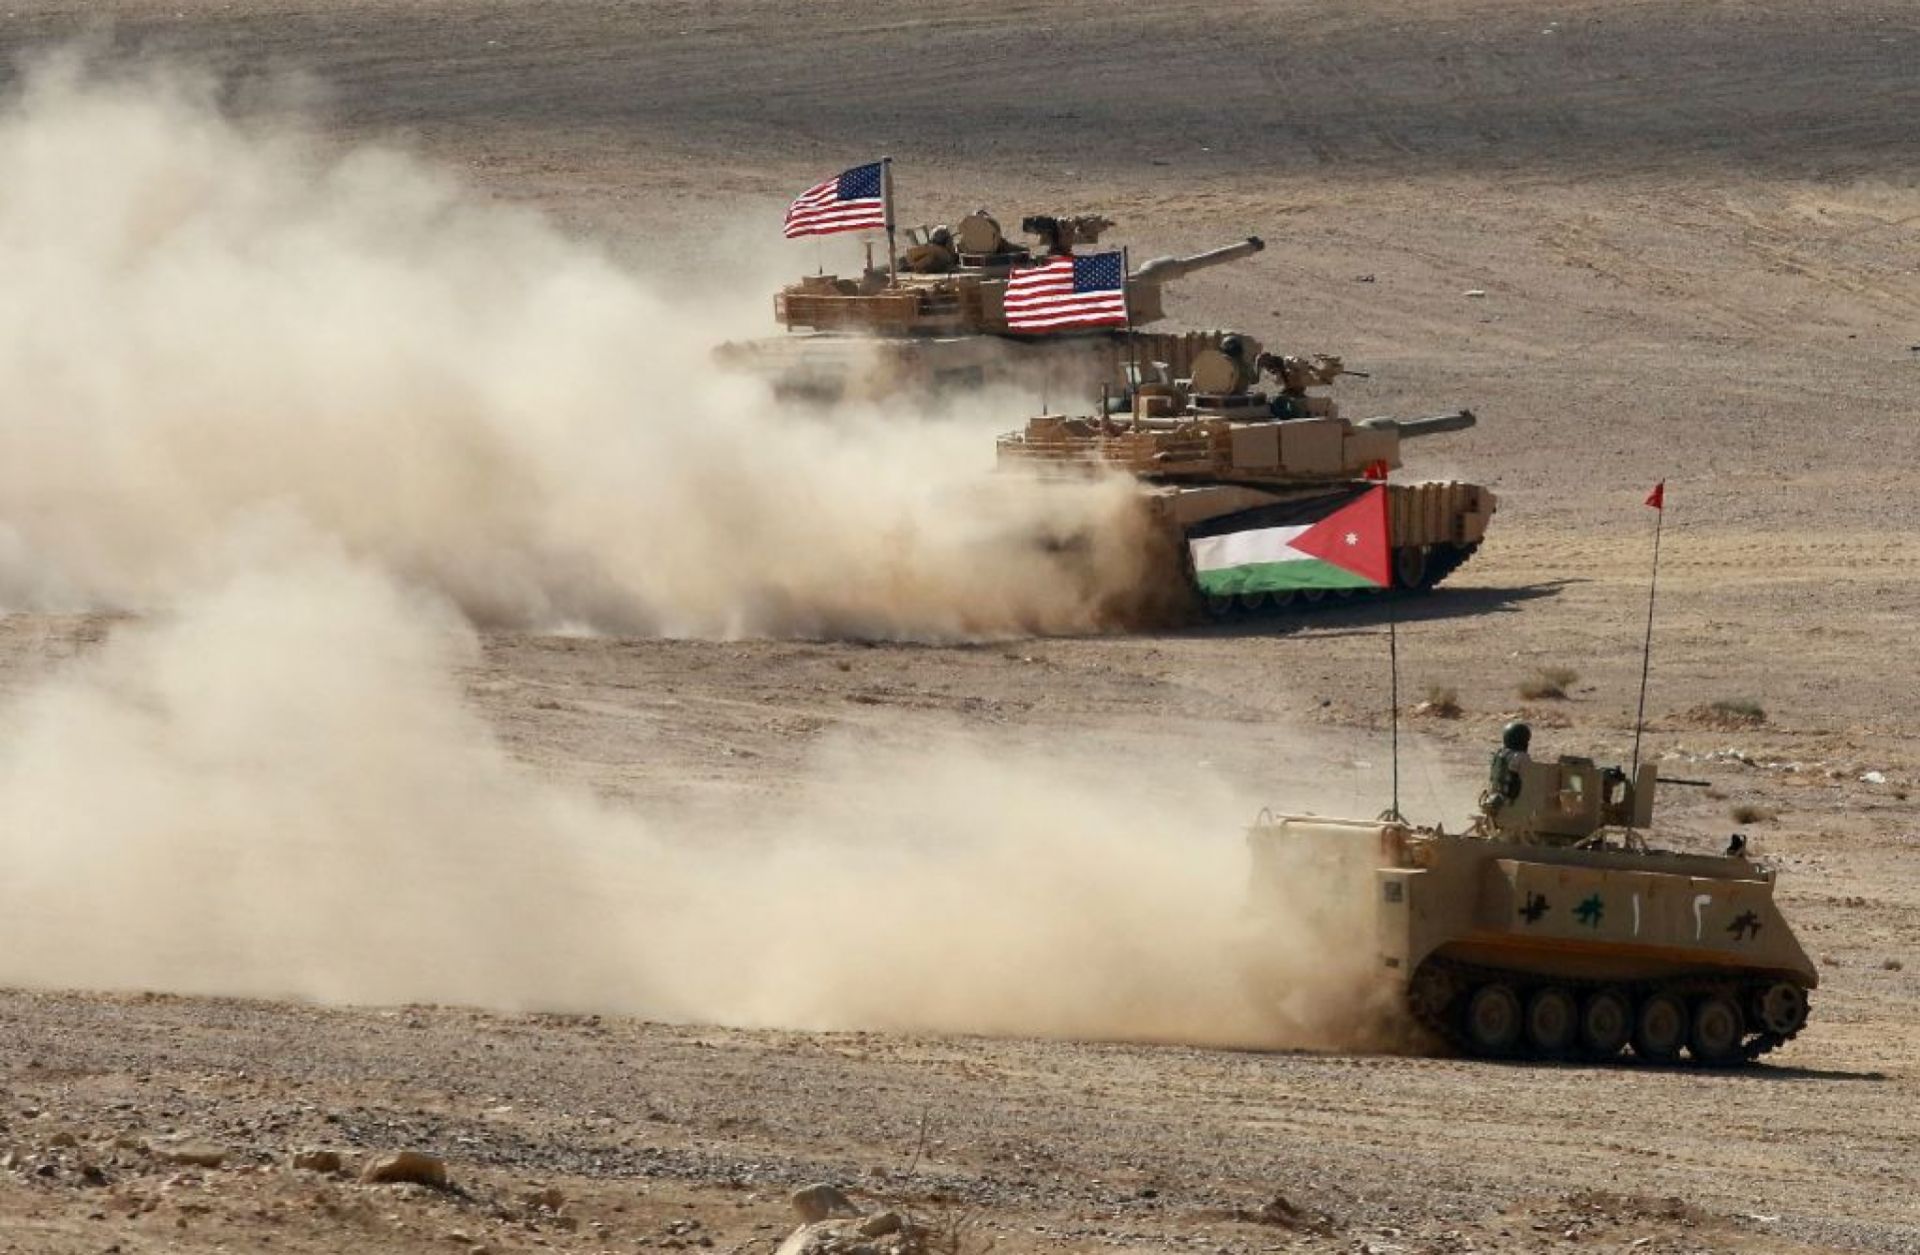 U.S. and Jordanian forces participate in the "Eager Lion" multinational military exercise on Sept. 14, 2022, in the Al-Zarqa governorate of Jordan.